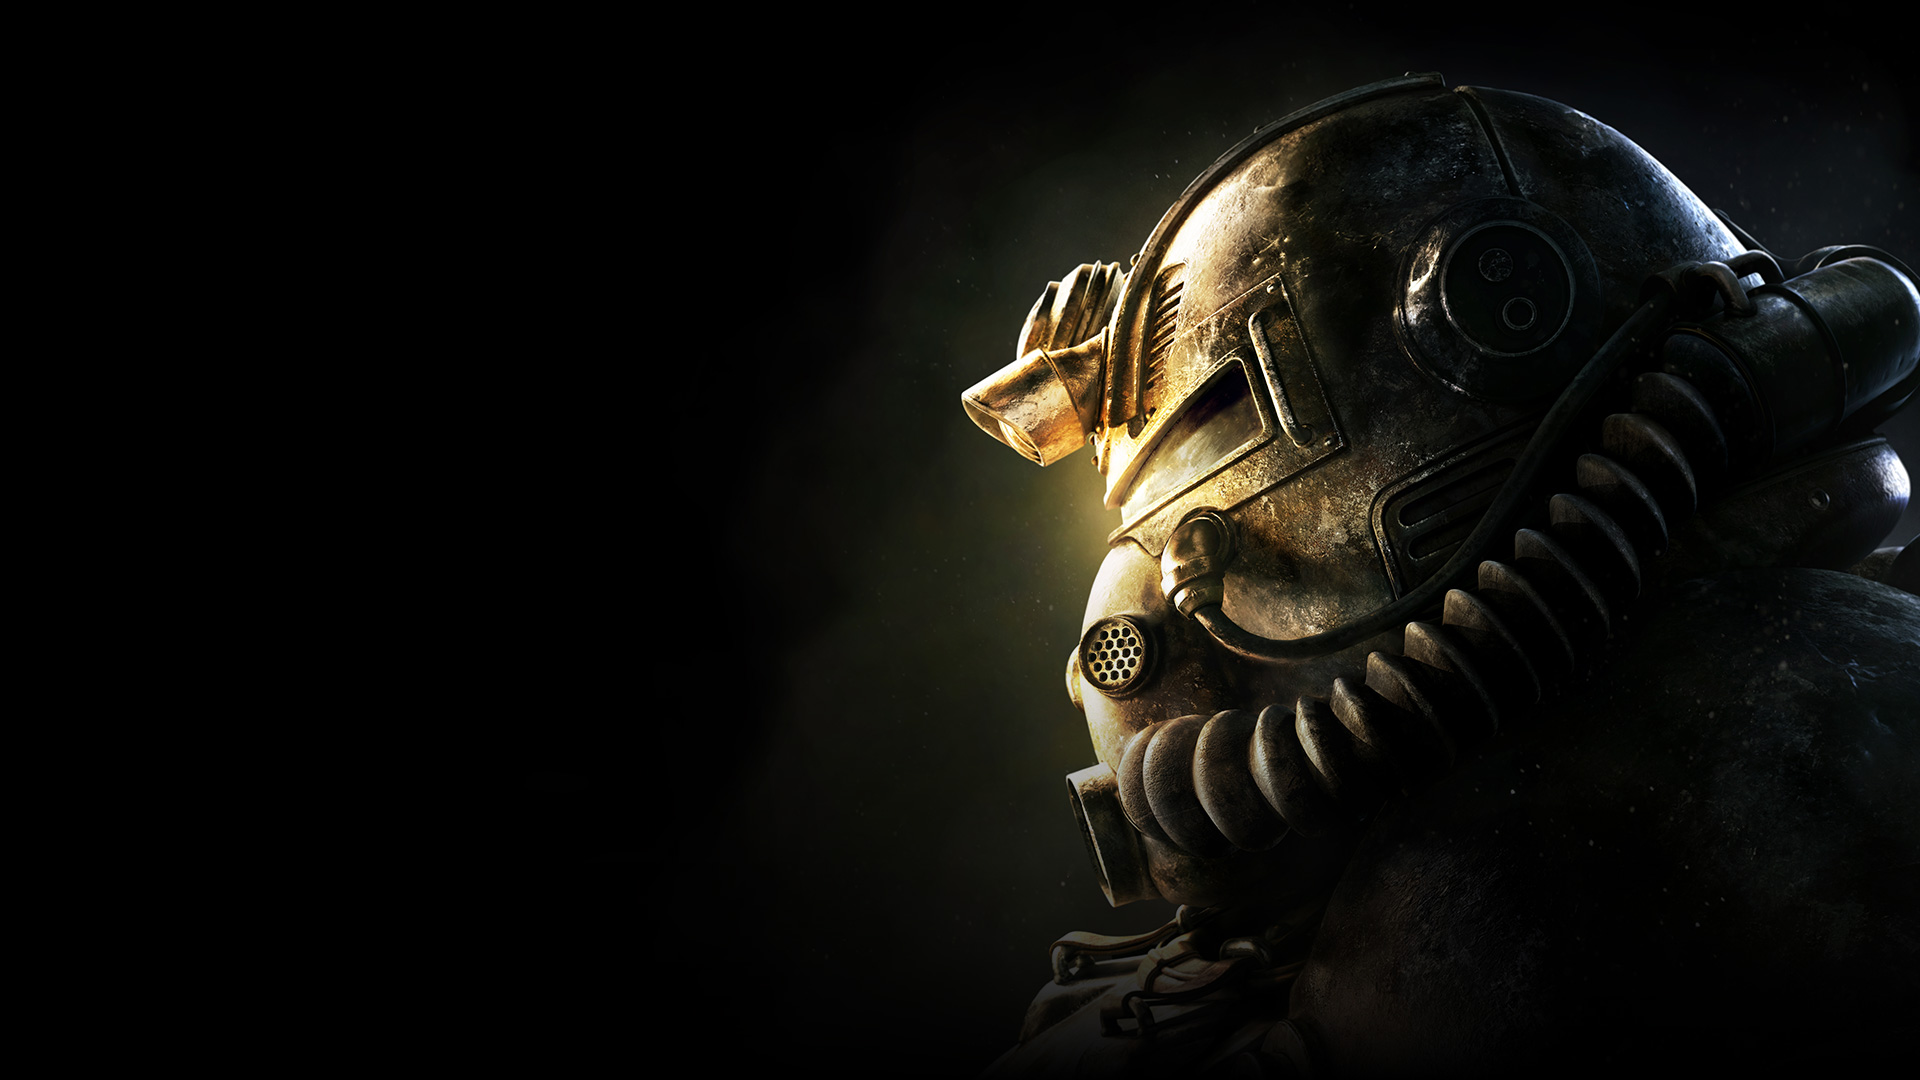 View of a Power Armor helmet in profile.